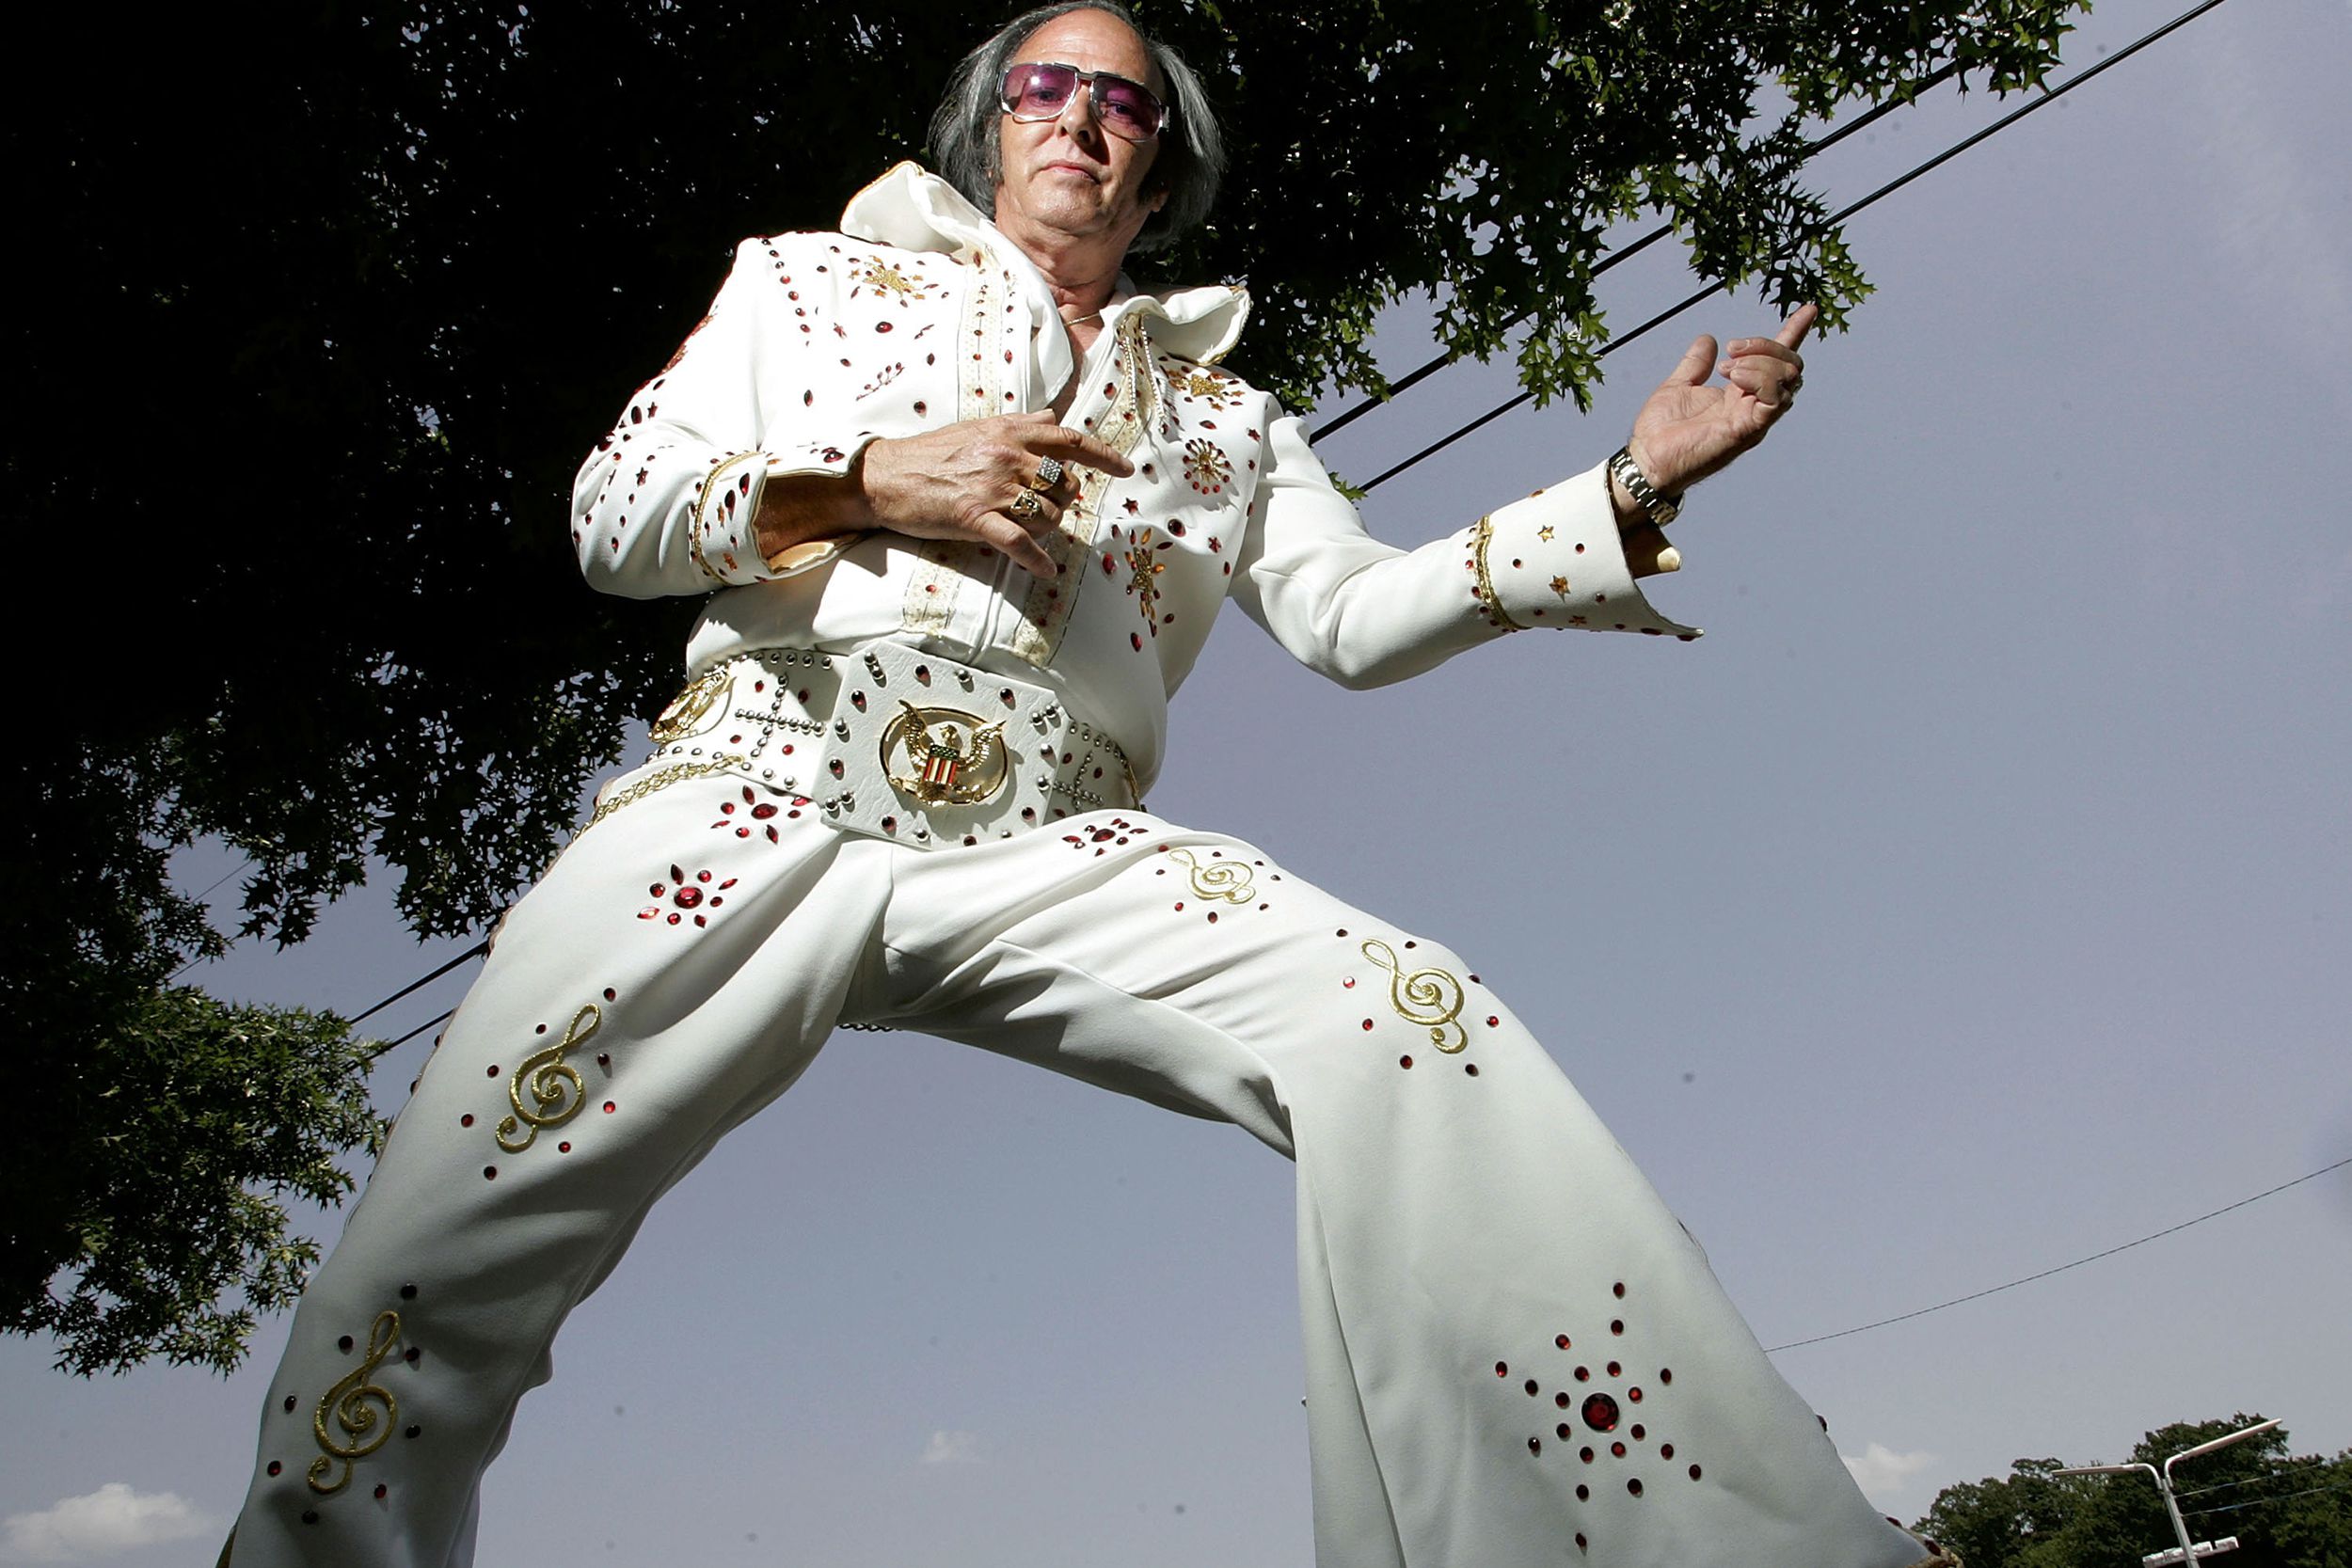 <p>In 2007, Graceland launched an Ultimate Elvis Tribute Artist Contest for Elvis impersonators looking to shine. The semifinal round usually happens every year at Graceland's <a href="https://www.graceland.com/elvis-week">Elvis Week</a>, typically in mid-August. Elvis was apparently fine with his impersonators and, in a complimentary letter to one such artist, wrote that "mimicry is a sincere form of being a fan."</p>